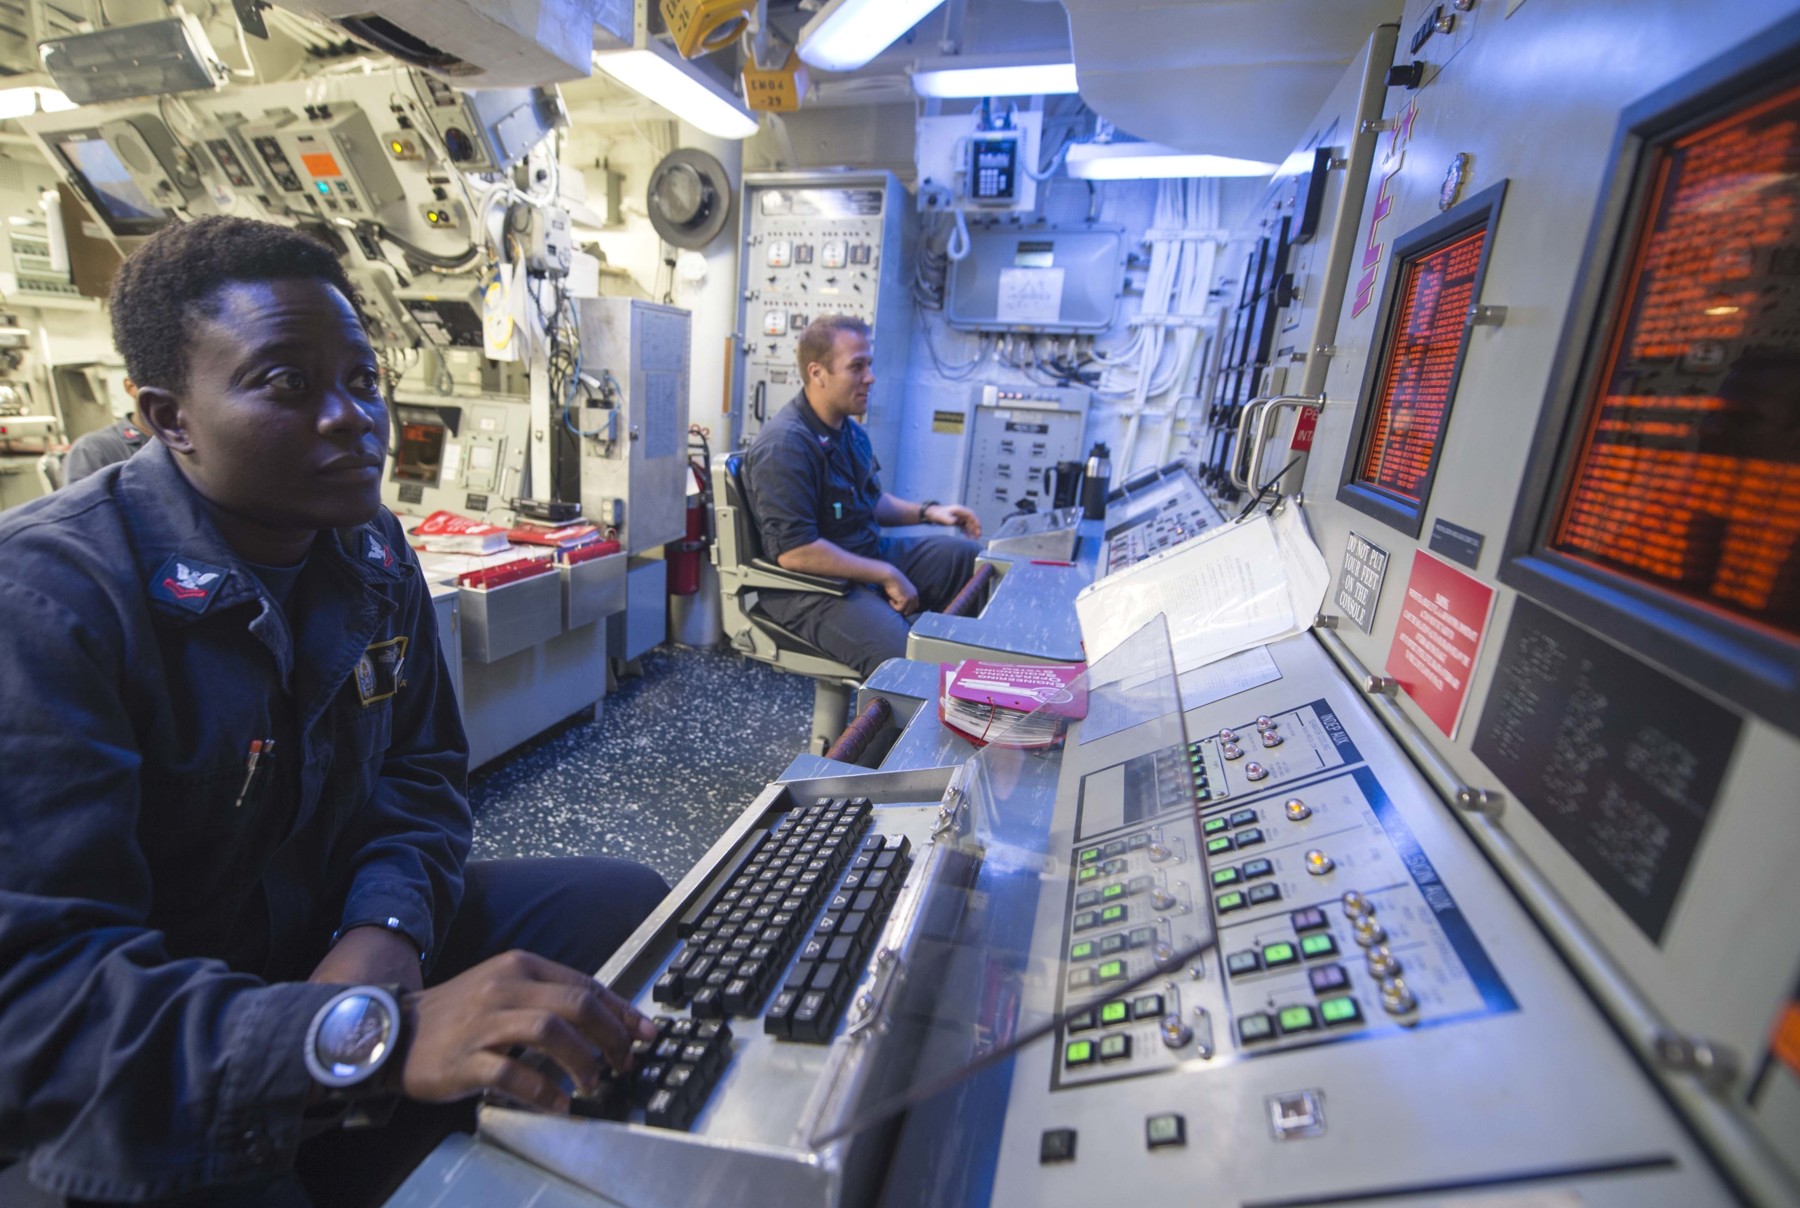 ddg-80 uss roosevelt guided missile destroyer arleigh burke class us navy 49 gas turbine control console